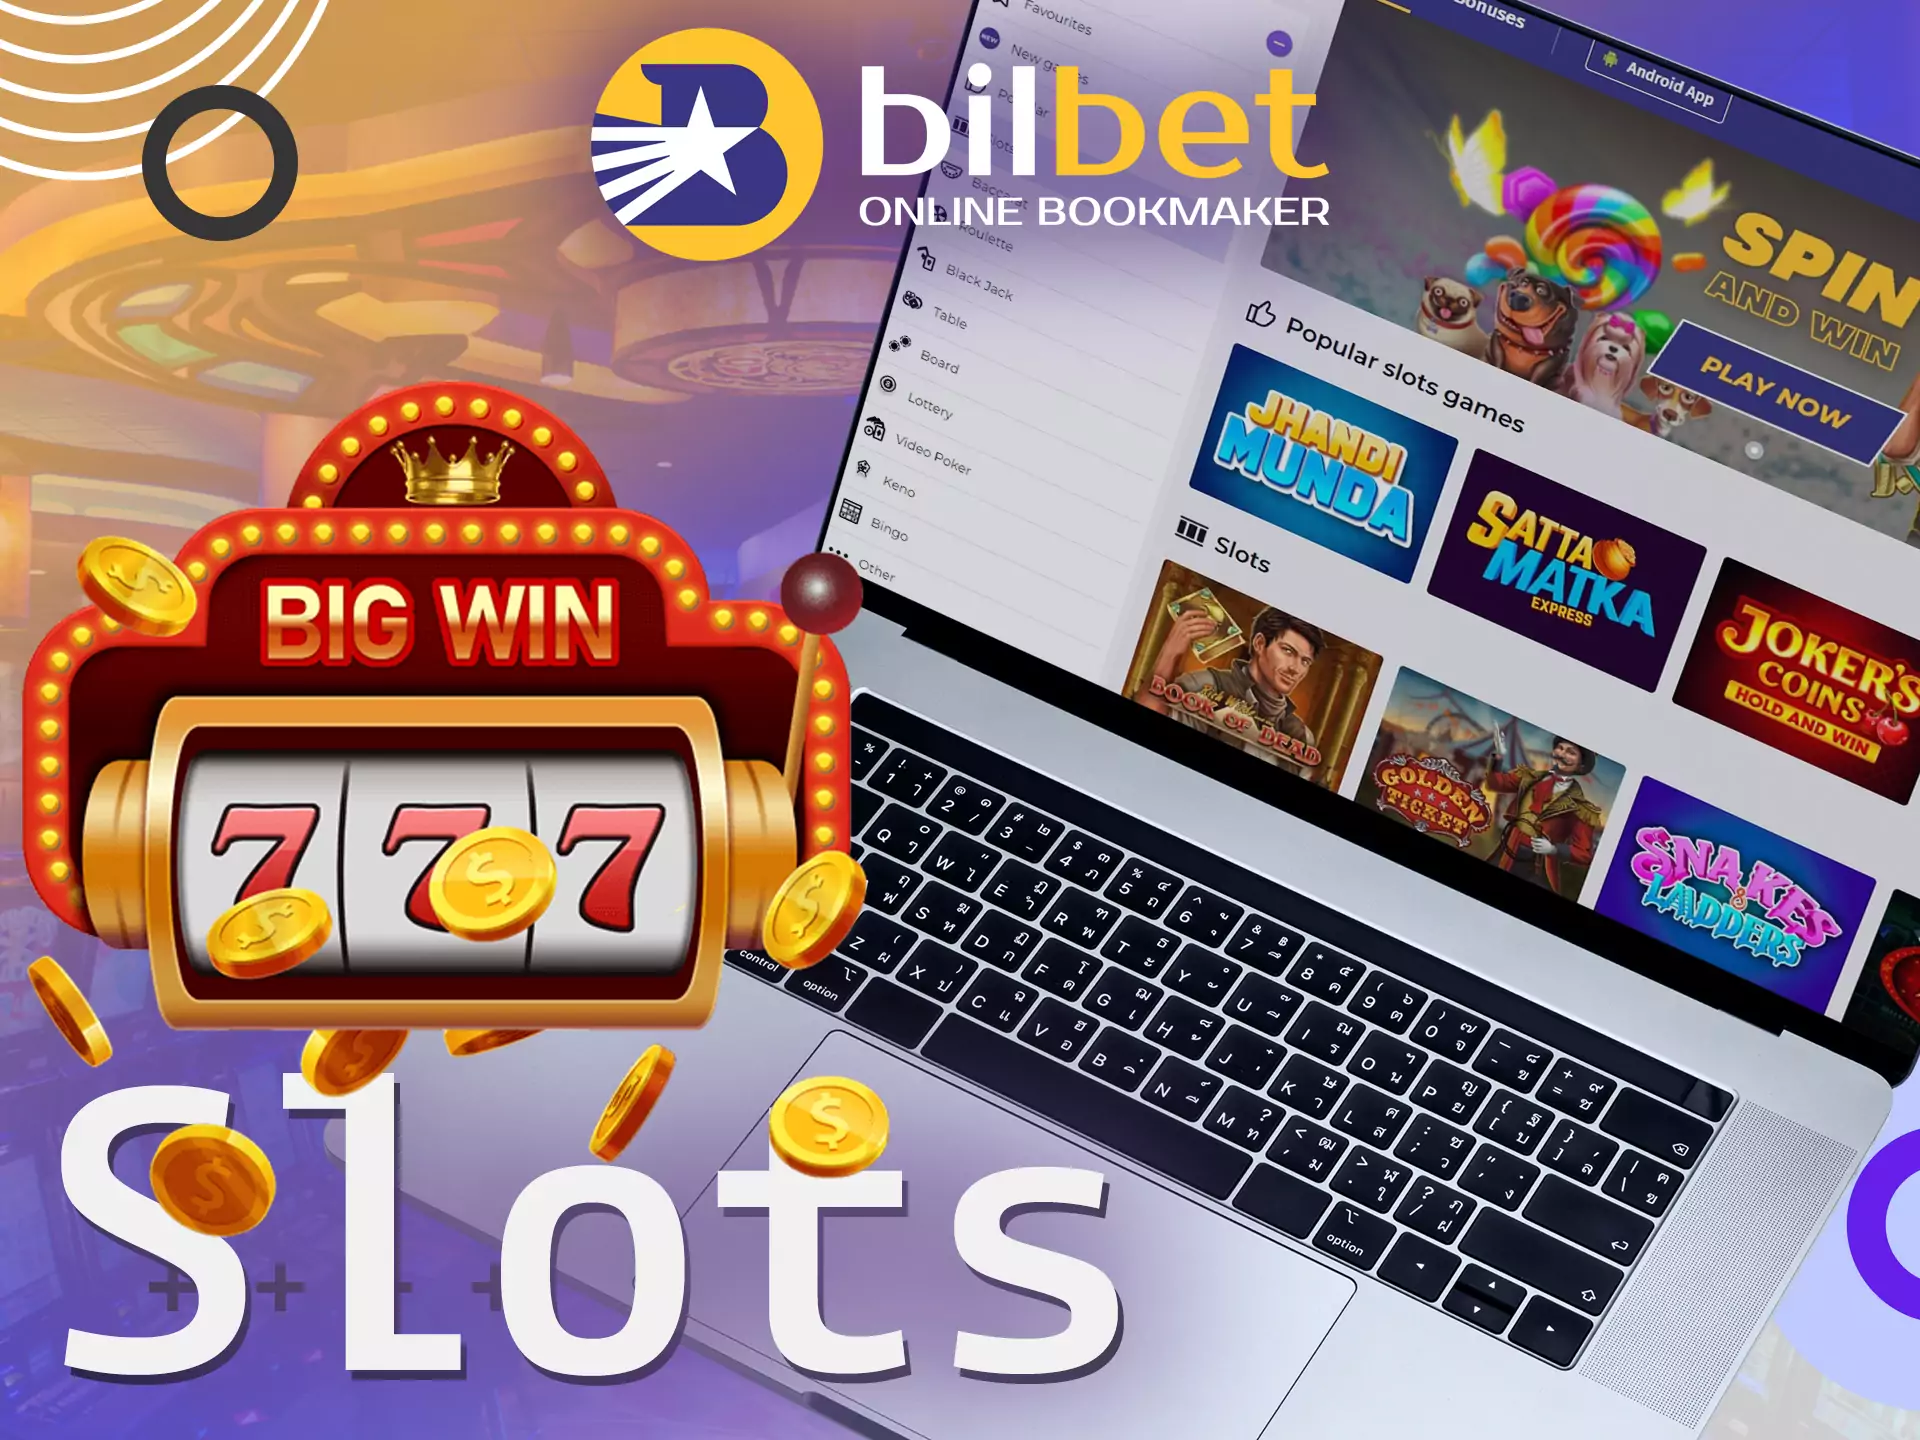 Slots games are popular on the Bilbet website.